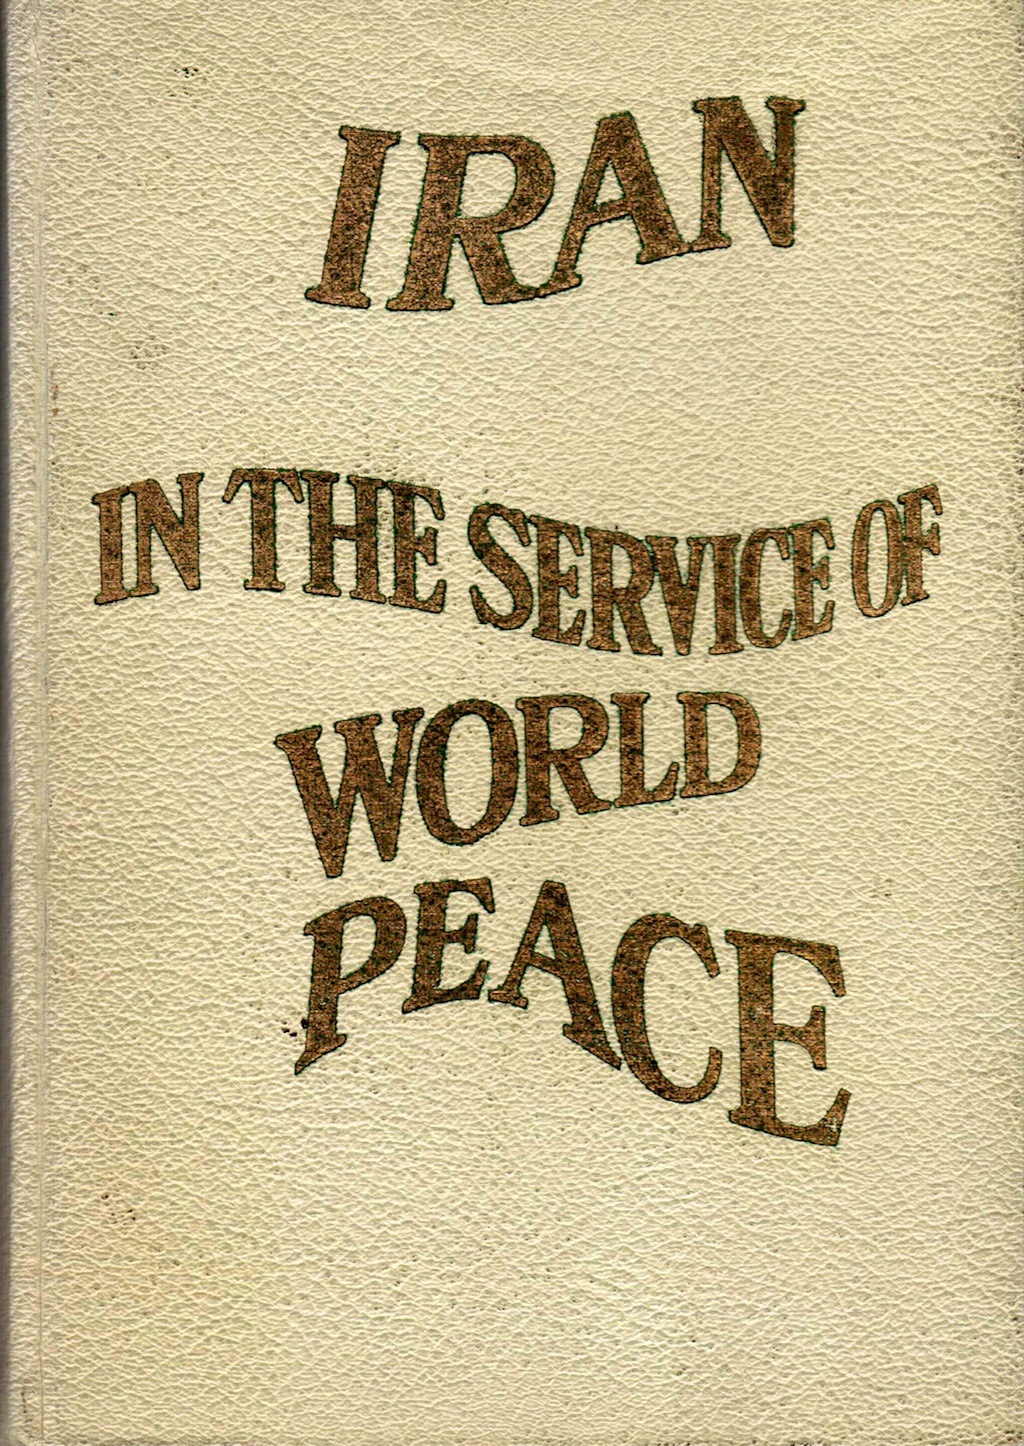 Iran in the Service of World Peace